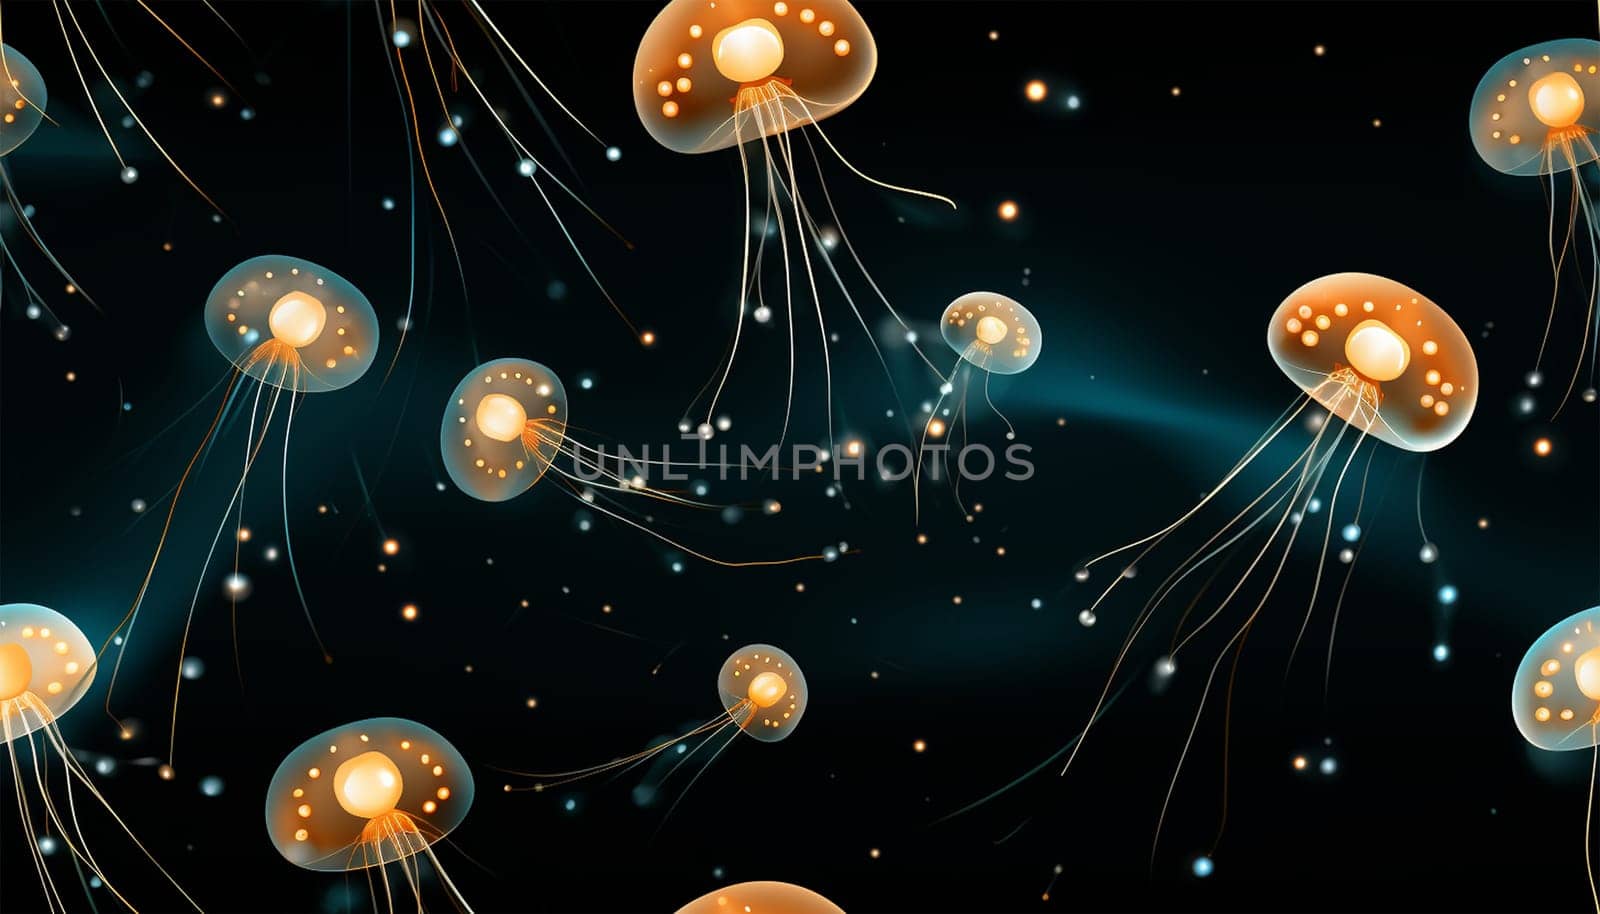 Jellyfish seamless pattern. Dark luxury art background with hand drawn jellyfish in gold art line style. Minimalistic banner with marine life for decoration, wallpaper, print, textile, interior design, packaging Cute